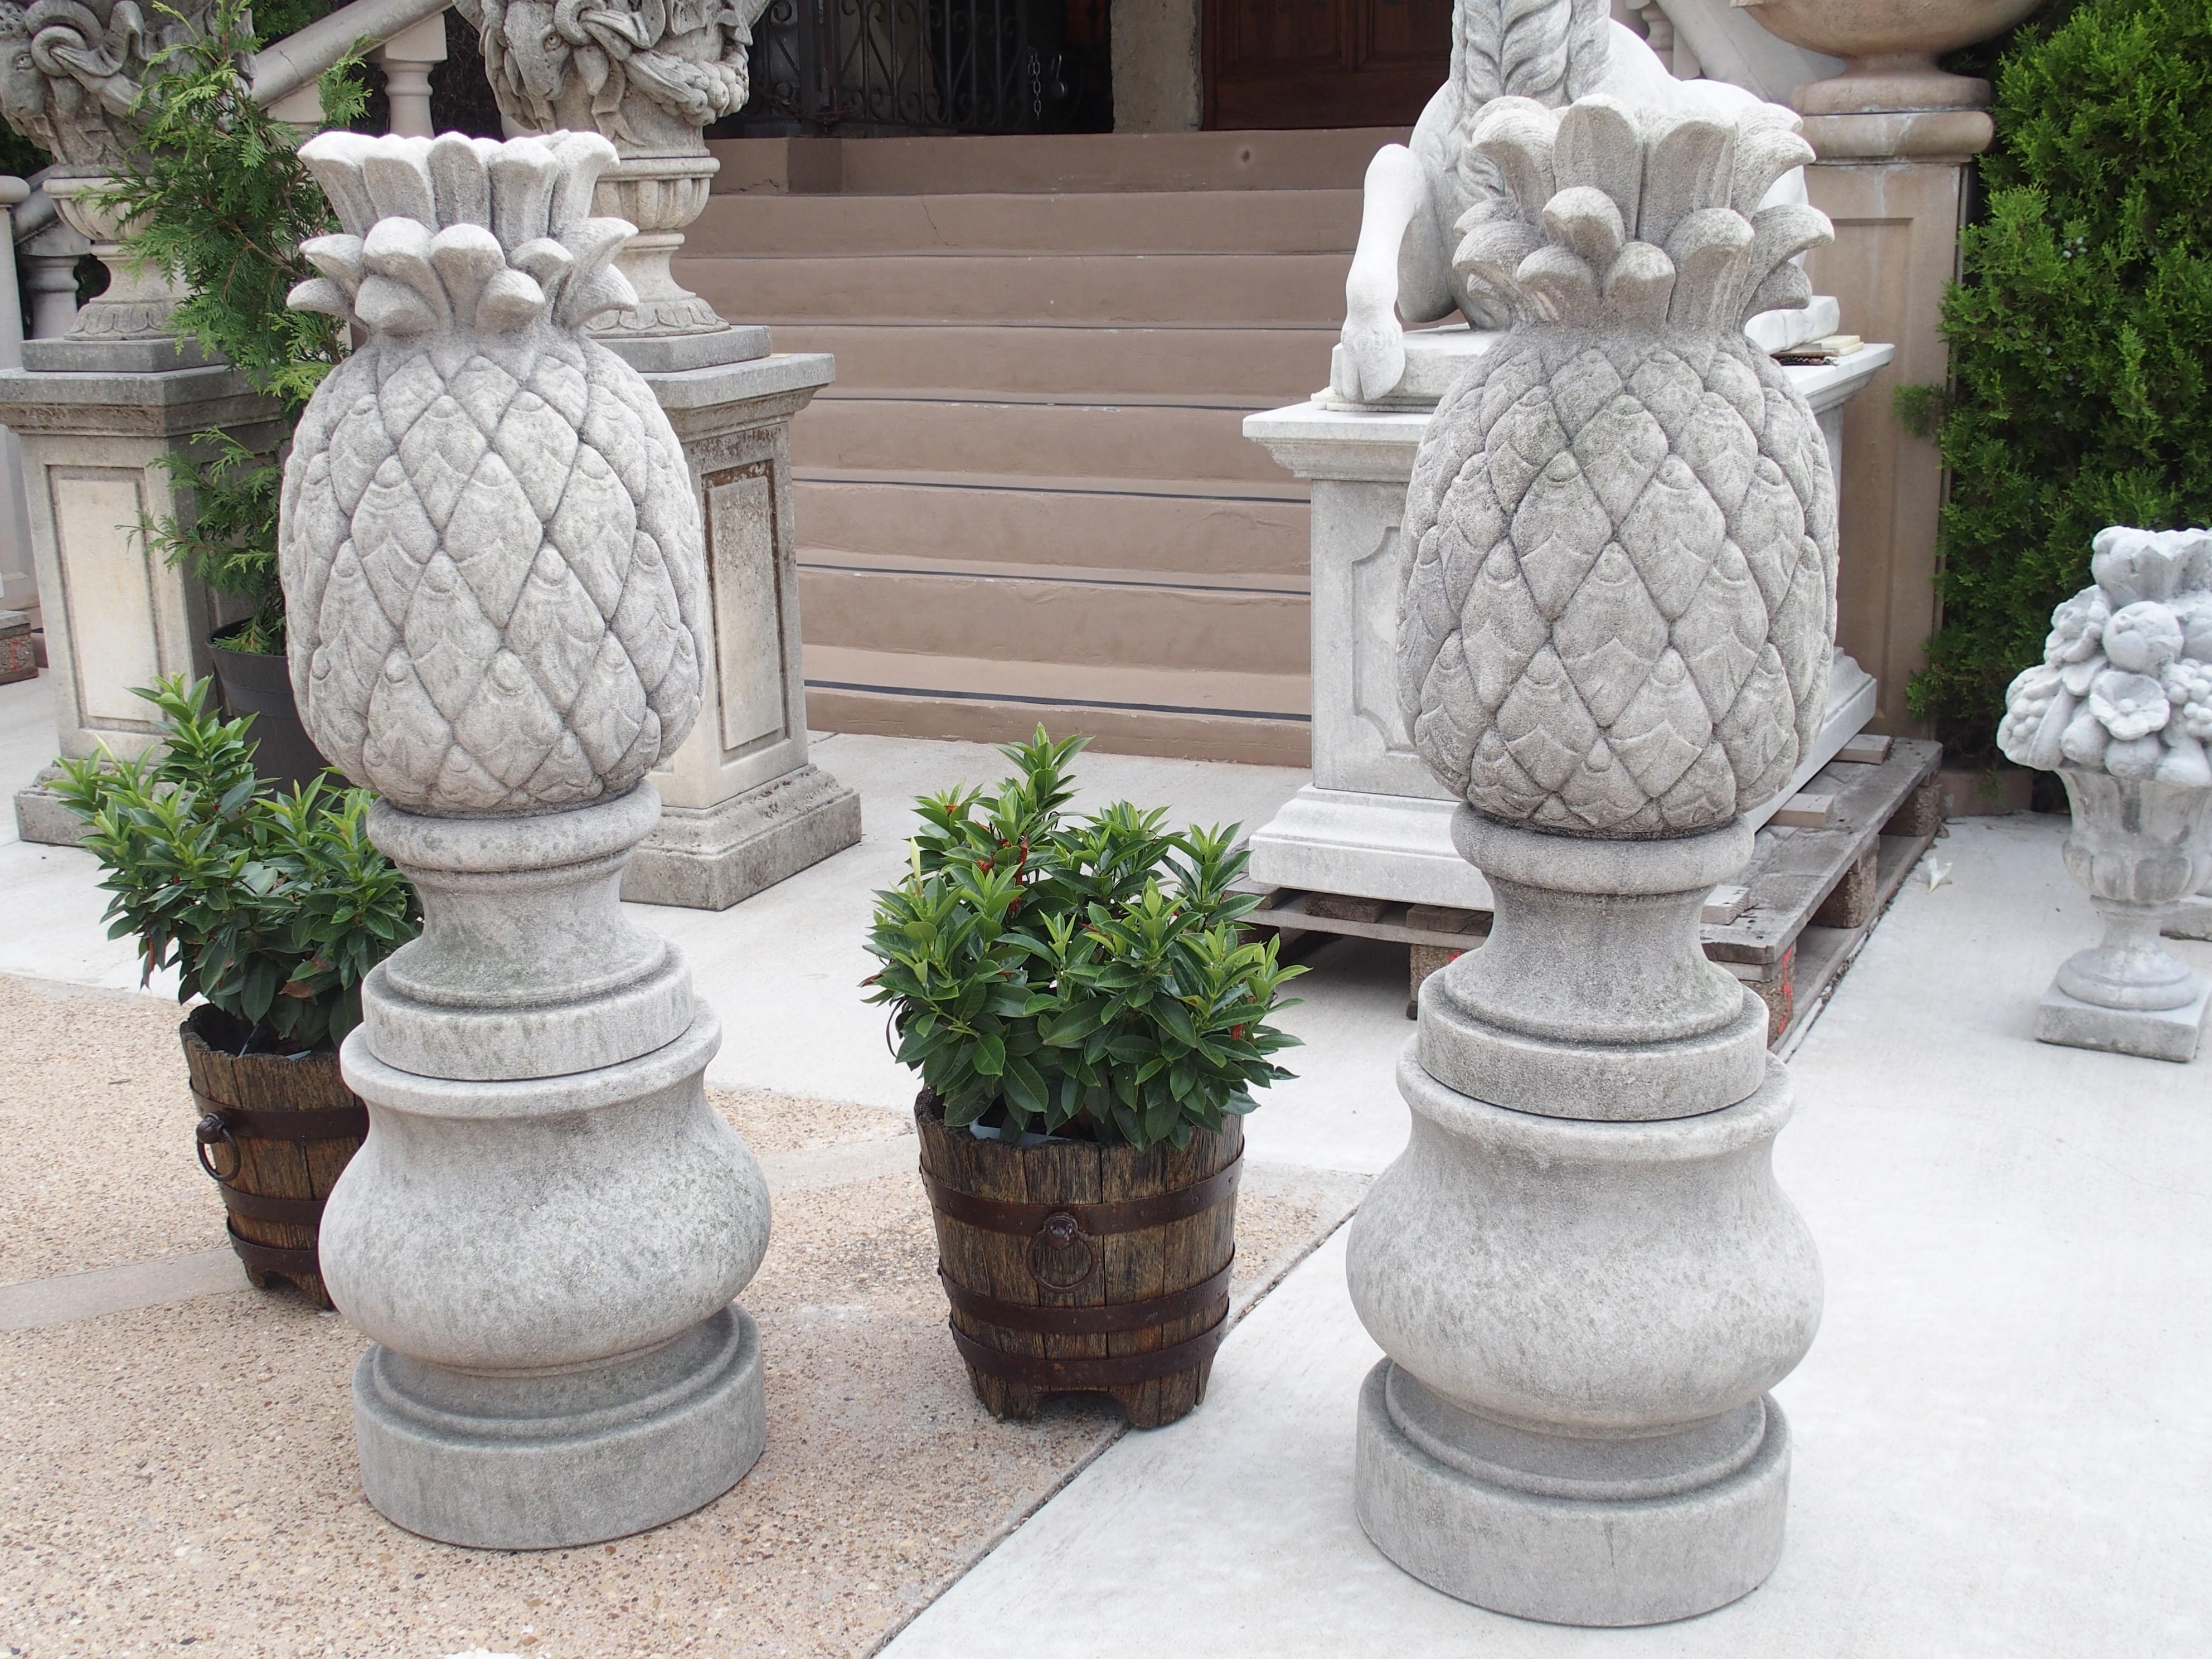 Hand-carved in Italy, this pair of limestone pineapple finials sits on 15 ¼ inch bulbous pedestals. Each pineapple has been carved from one piece of stone, which is a separate stone from the pedestals.

The amount of detail put into each carving